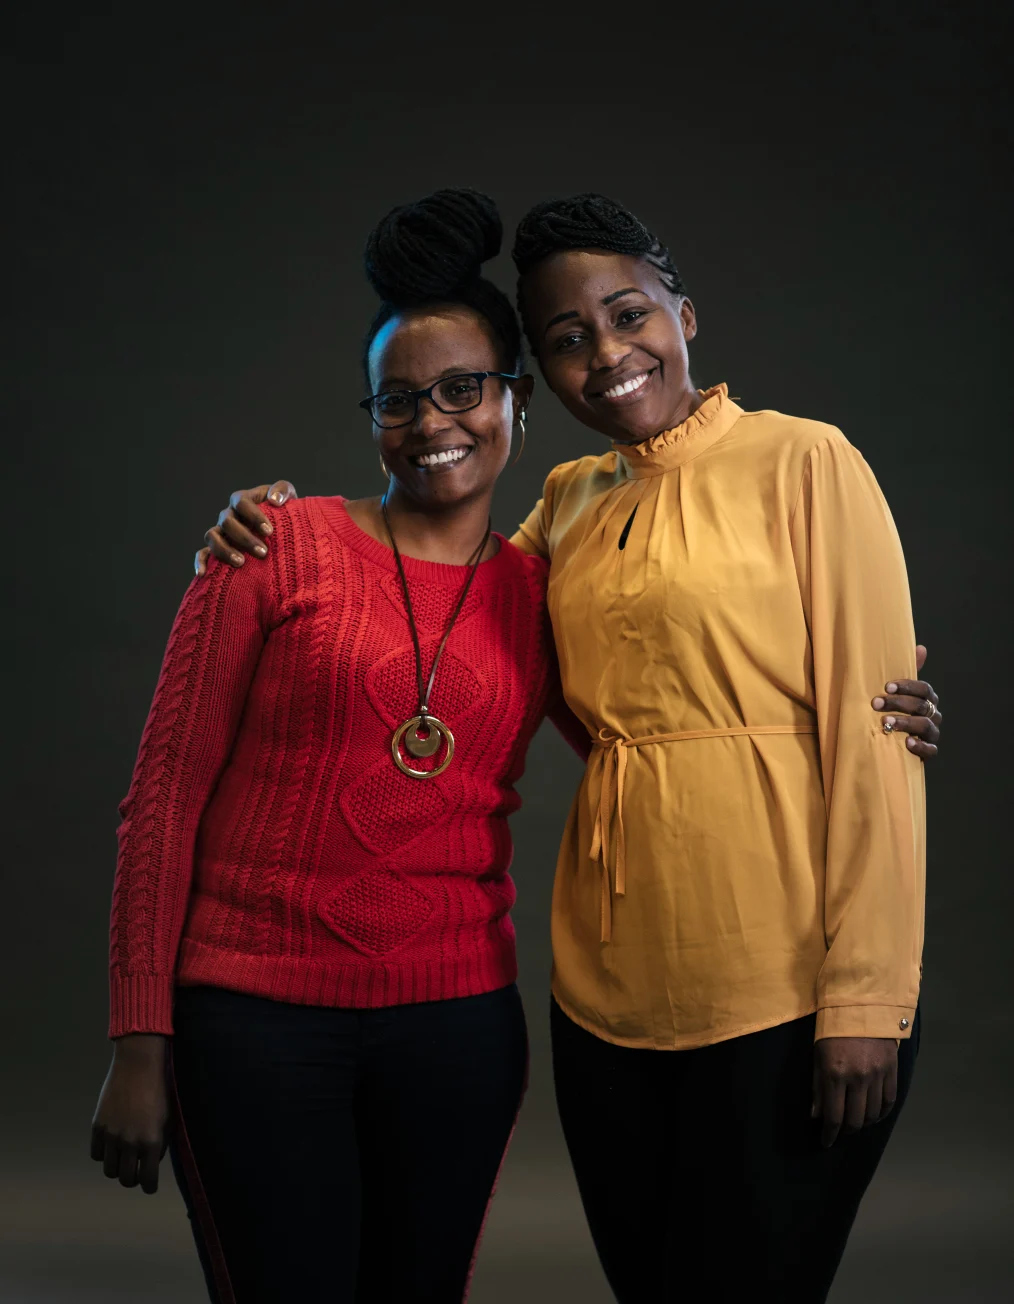 In this picture, two women with deep skin tones are shown smiling toward the camera in front of a black
backsplash. One woman has a red sweater, black pants, and glasses, while the other has a yellow 
drawcord waist shirt dress and black pants.